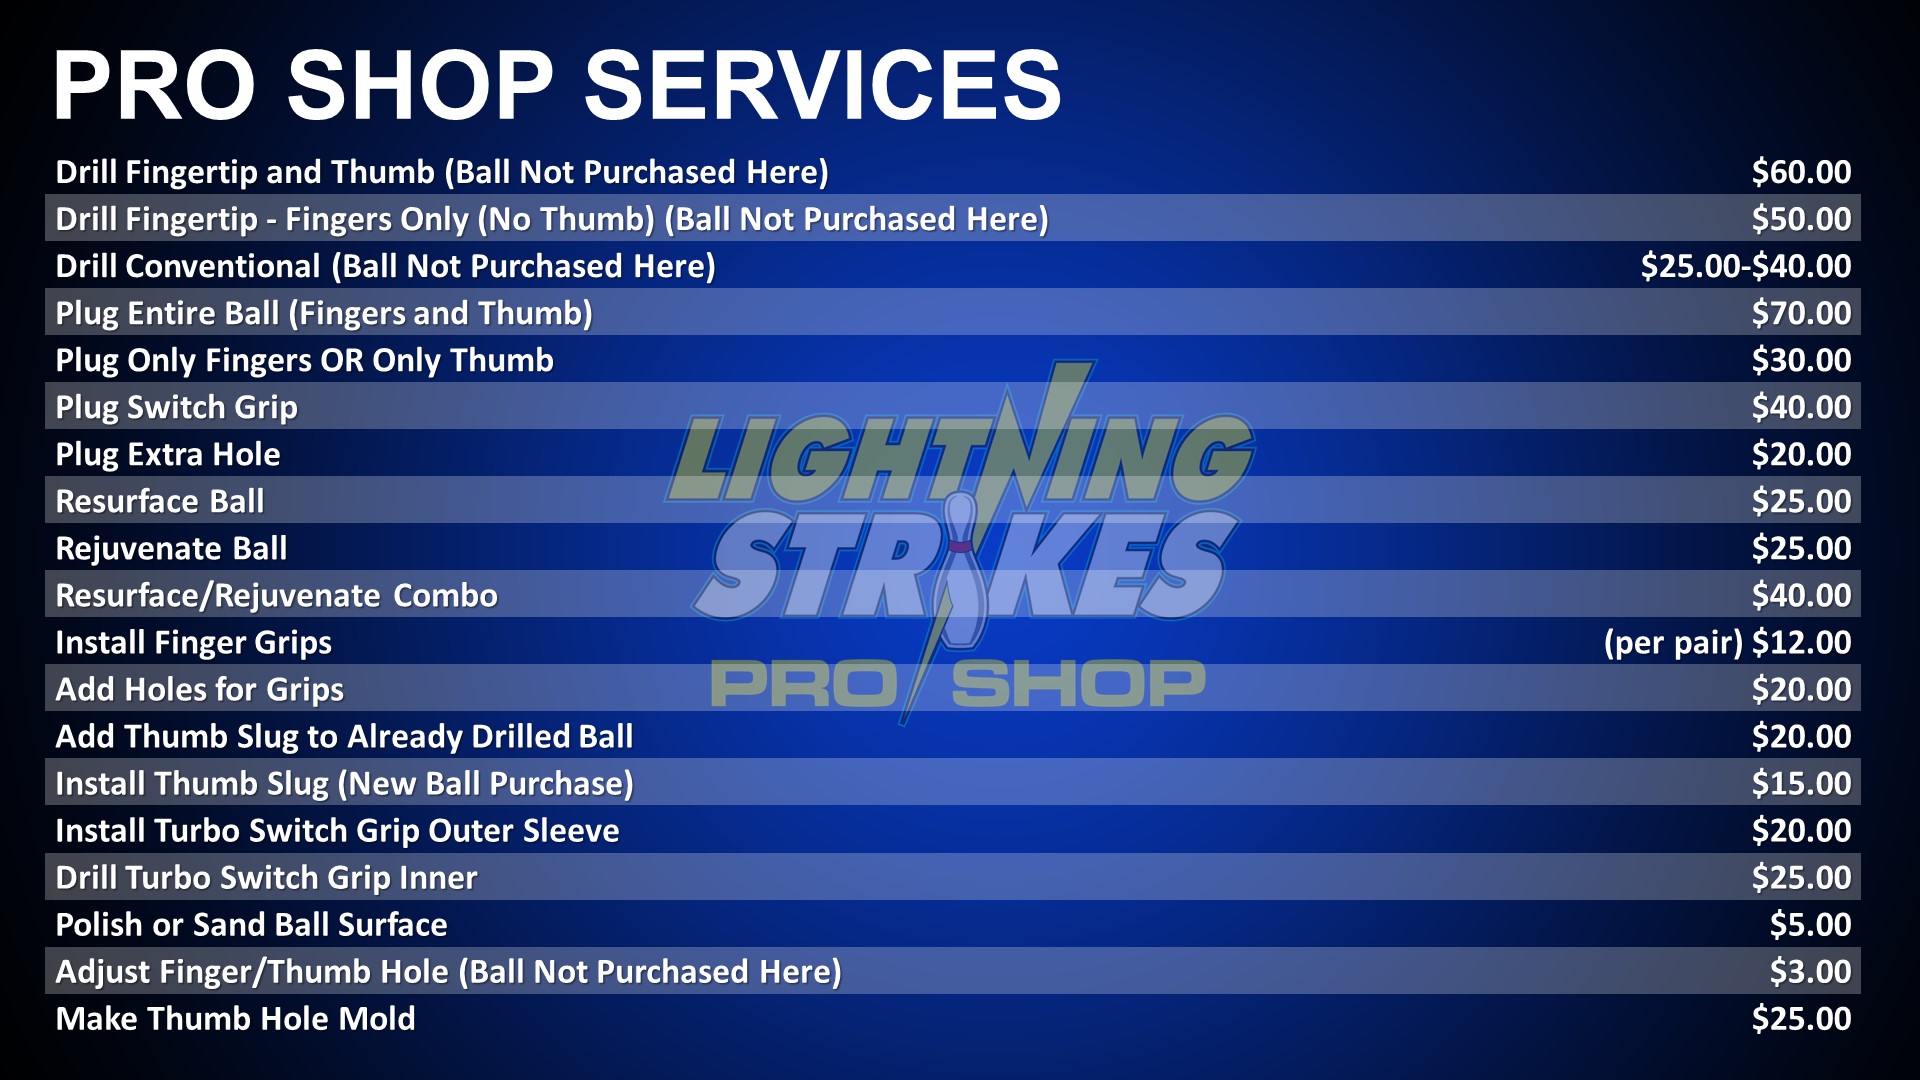 A list of prices of services offered by the pro shop.